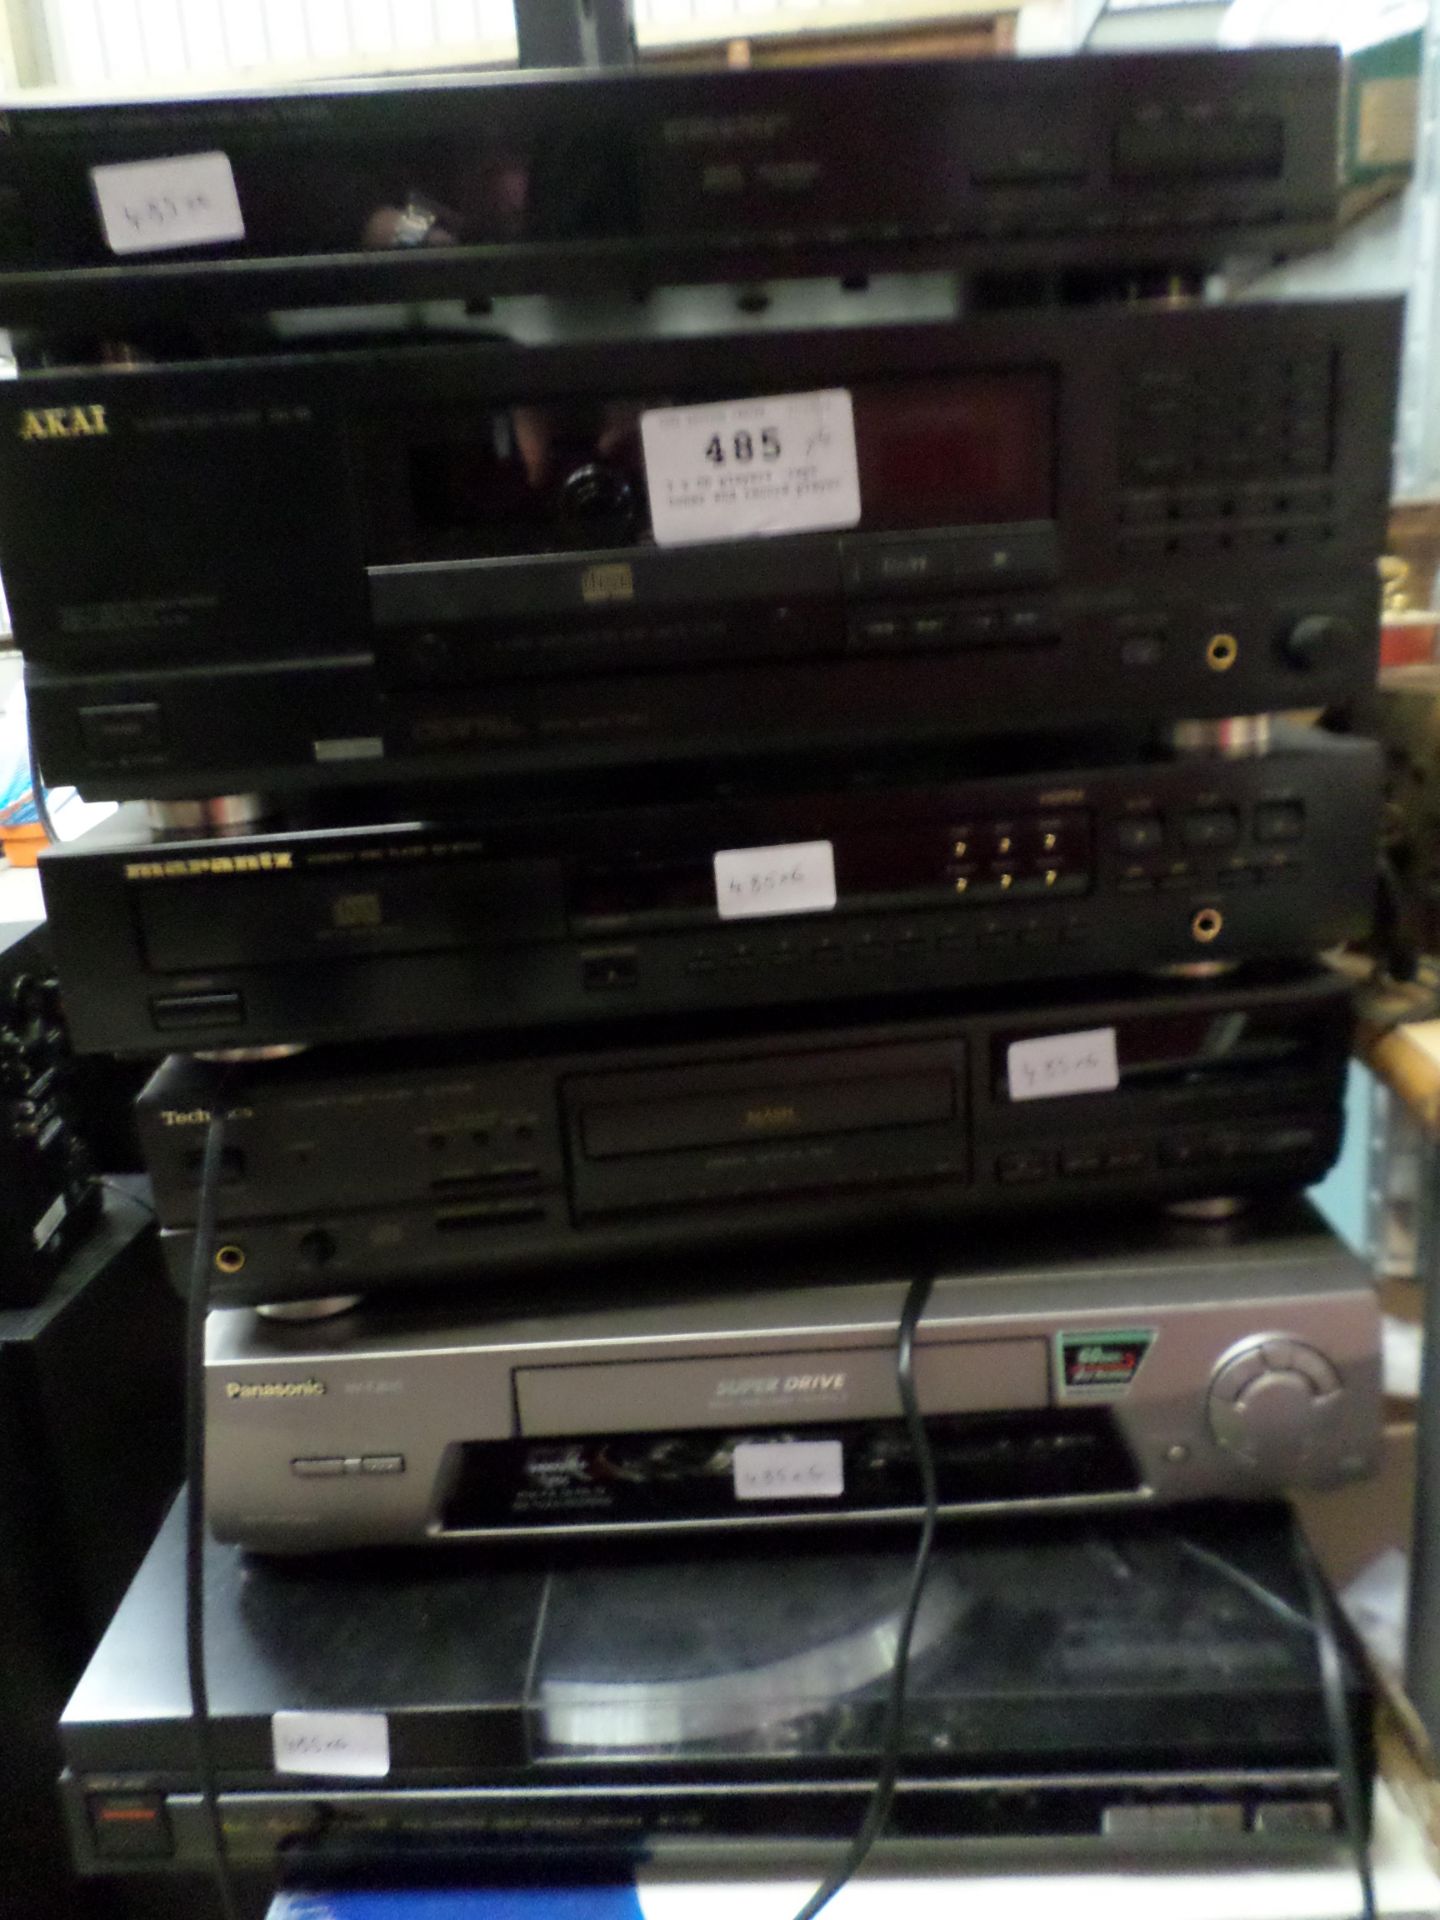 3 x CD players, tape, tuner and record player